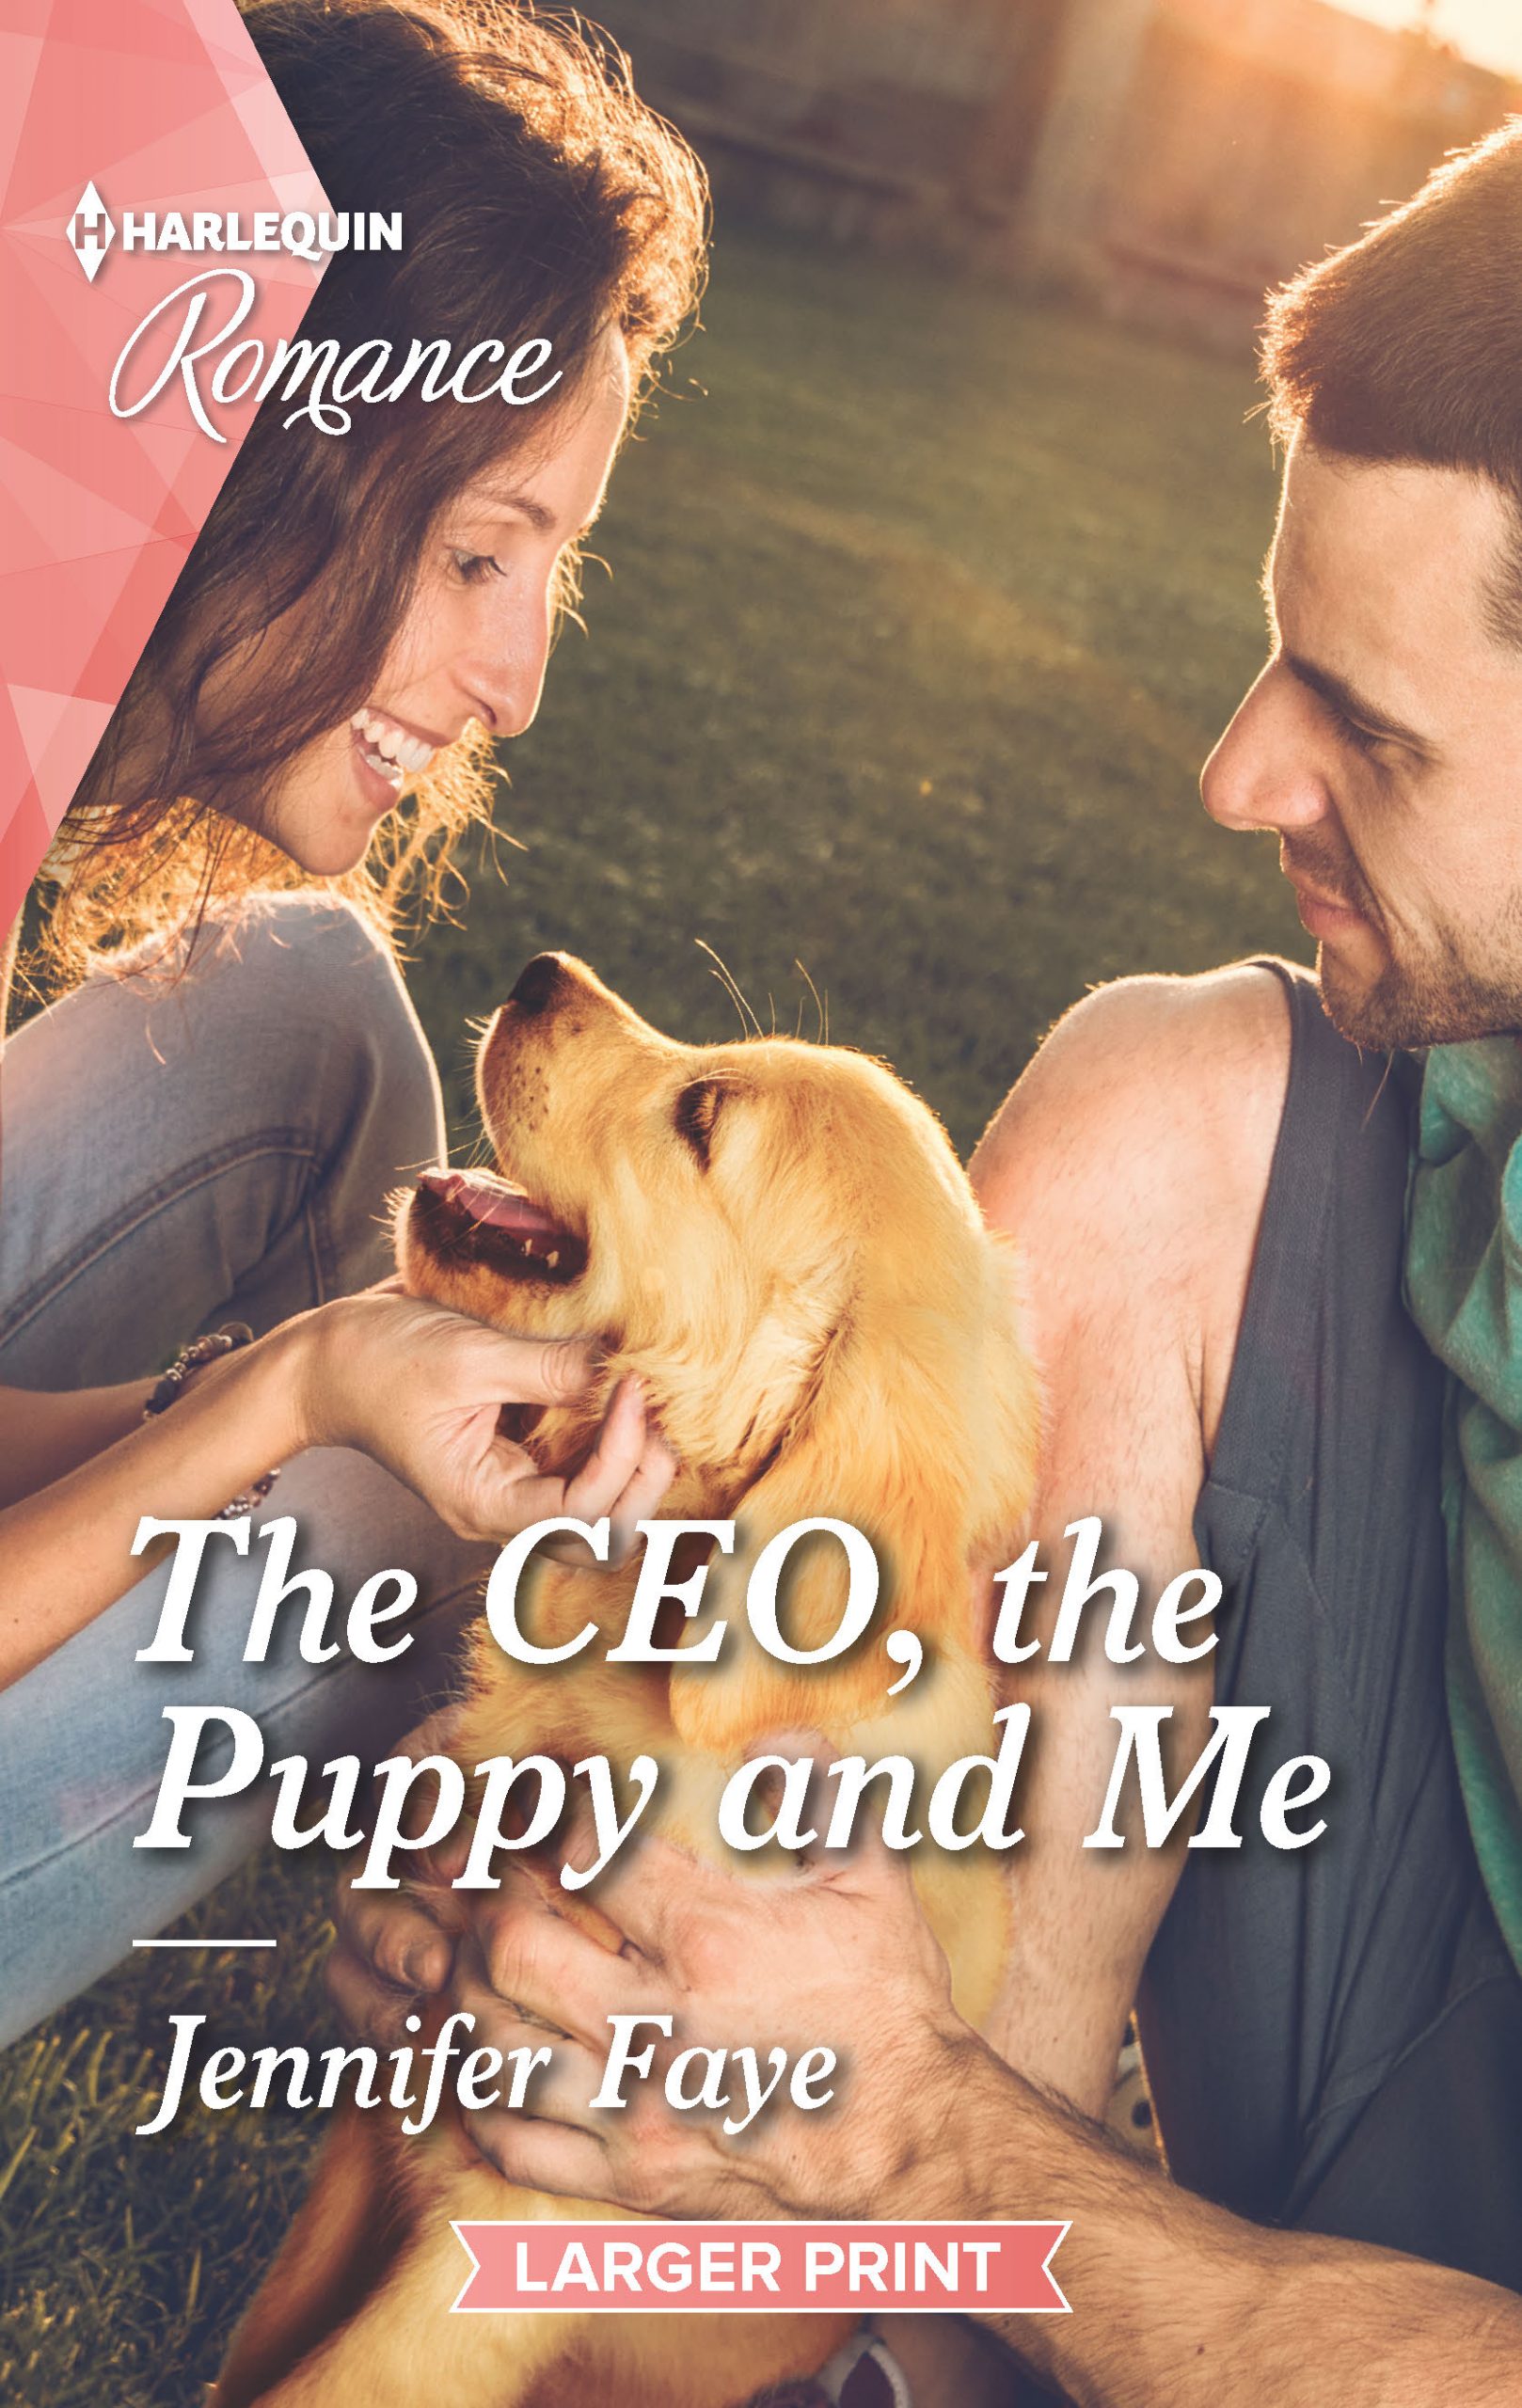 The CEO, the Puppy and Me by Jennifer Faye